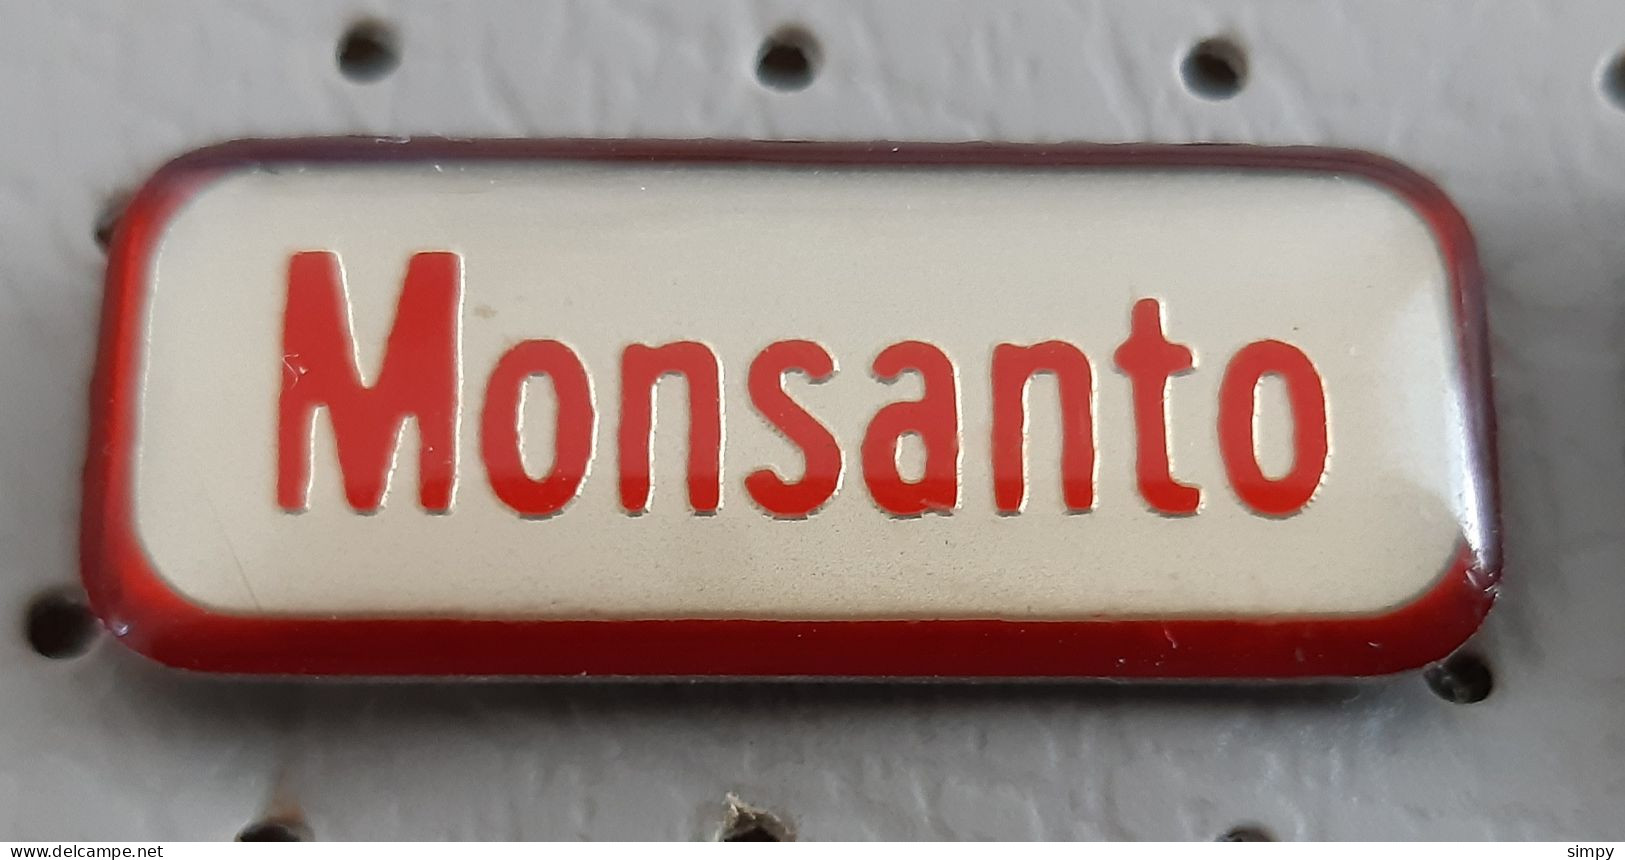 MONSANTO Herbicide Pesticide Agrochemical Agriculture Farming, Chemical  Industry Pin - Merken